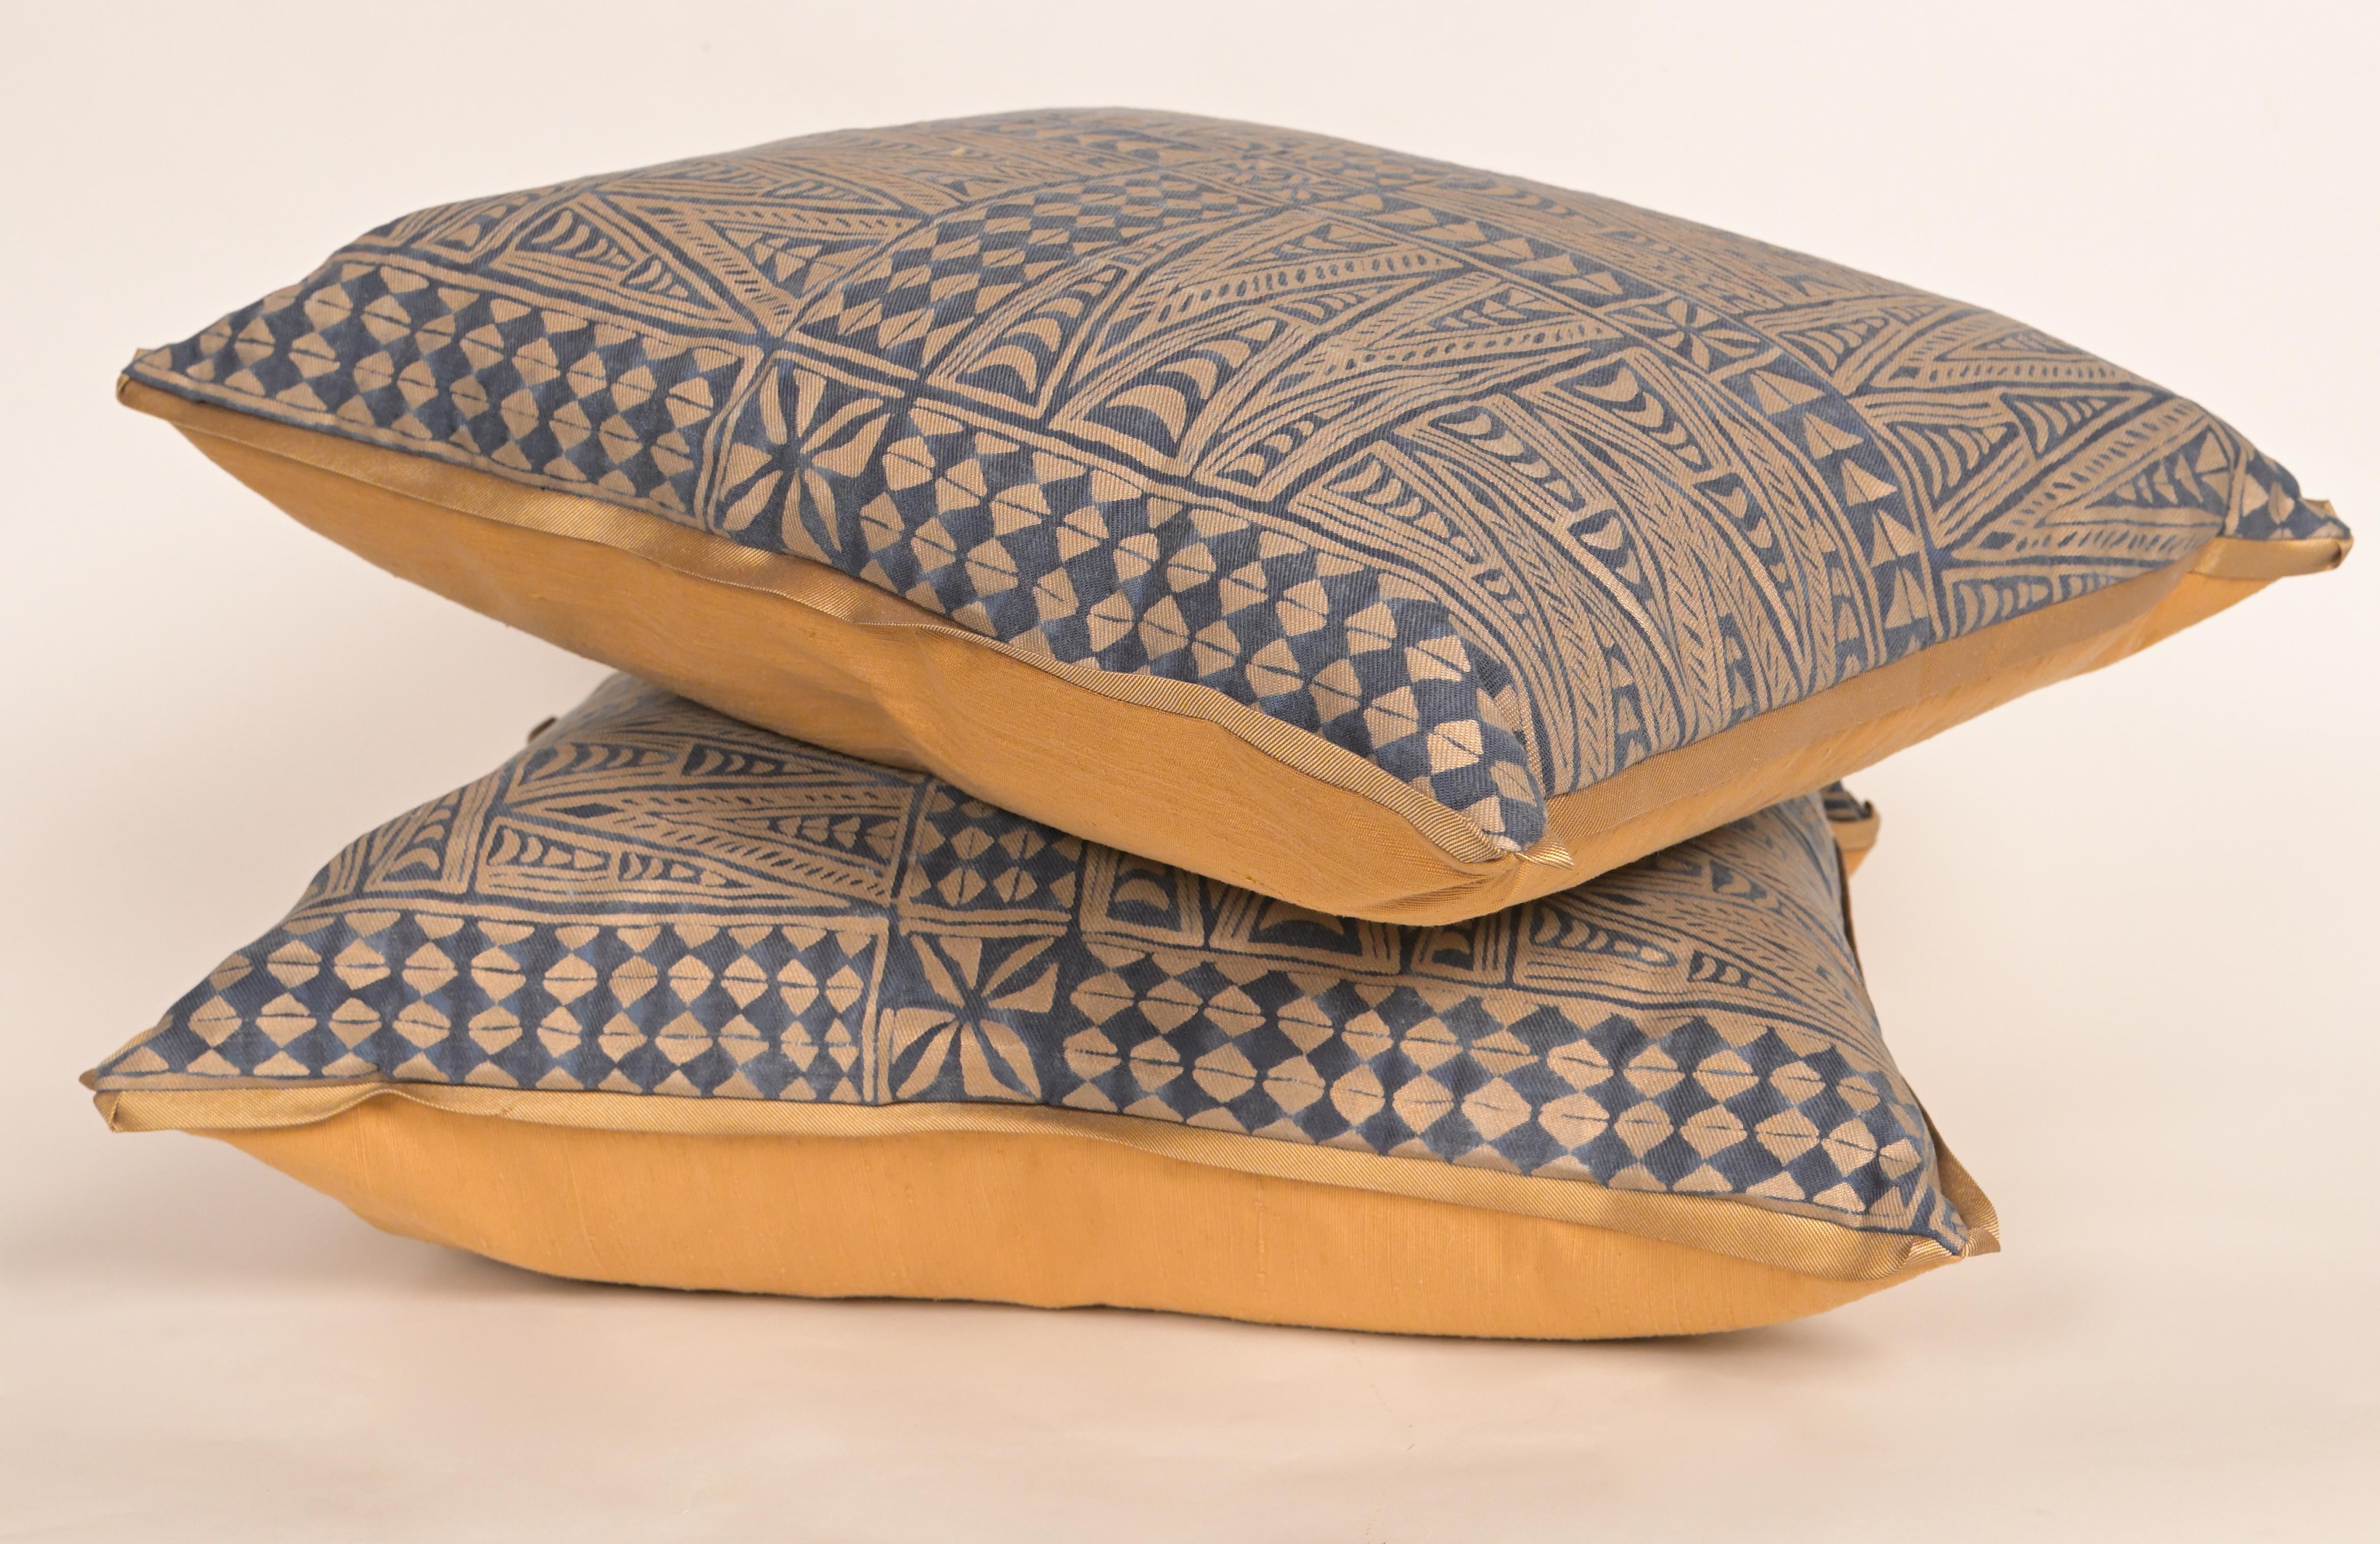 Pair of Fortuny Cushions with Rare Melilla Pattern by David Duncan Studio In New Condition For Sale In New York, NY